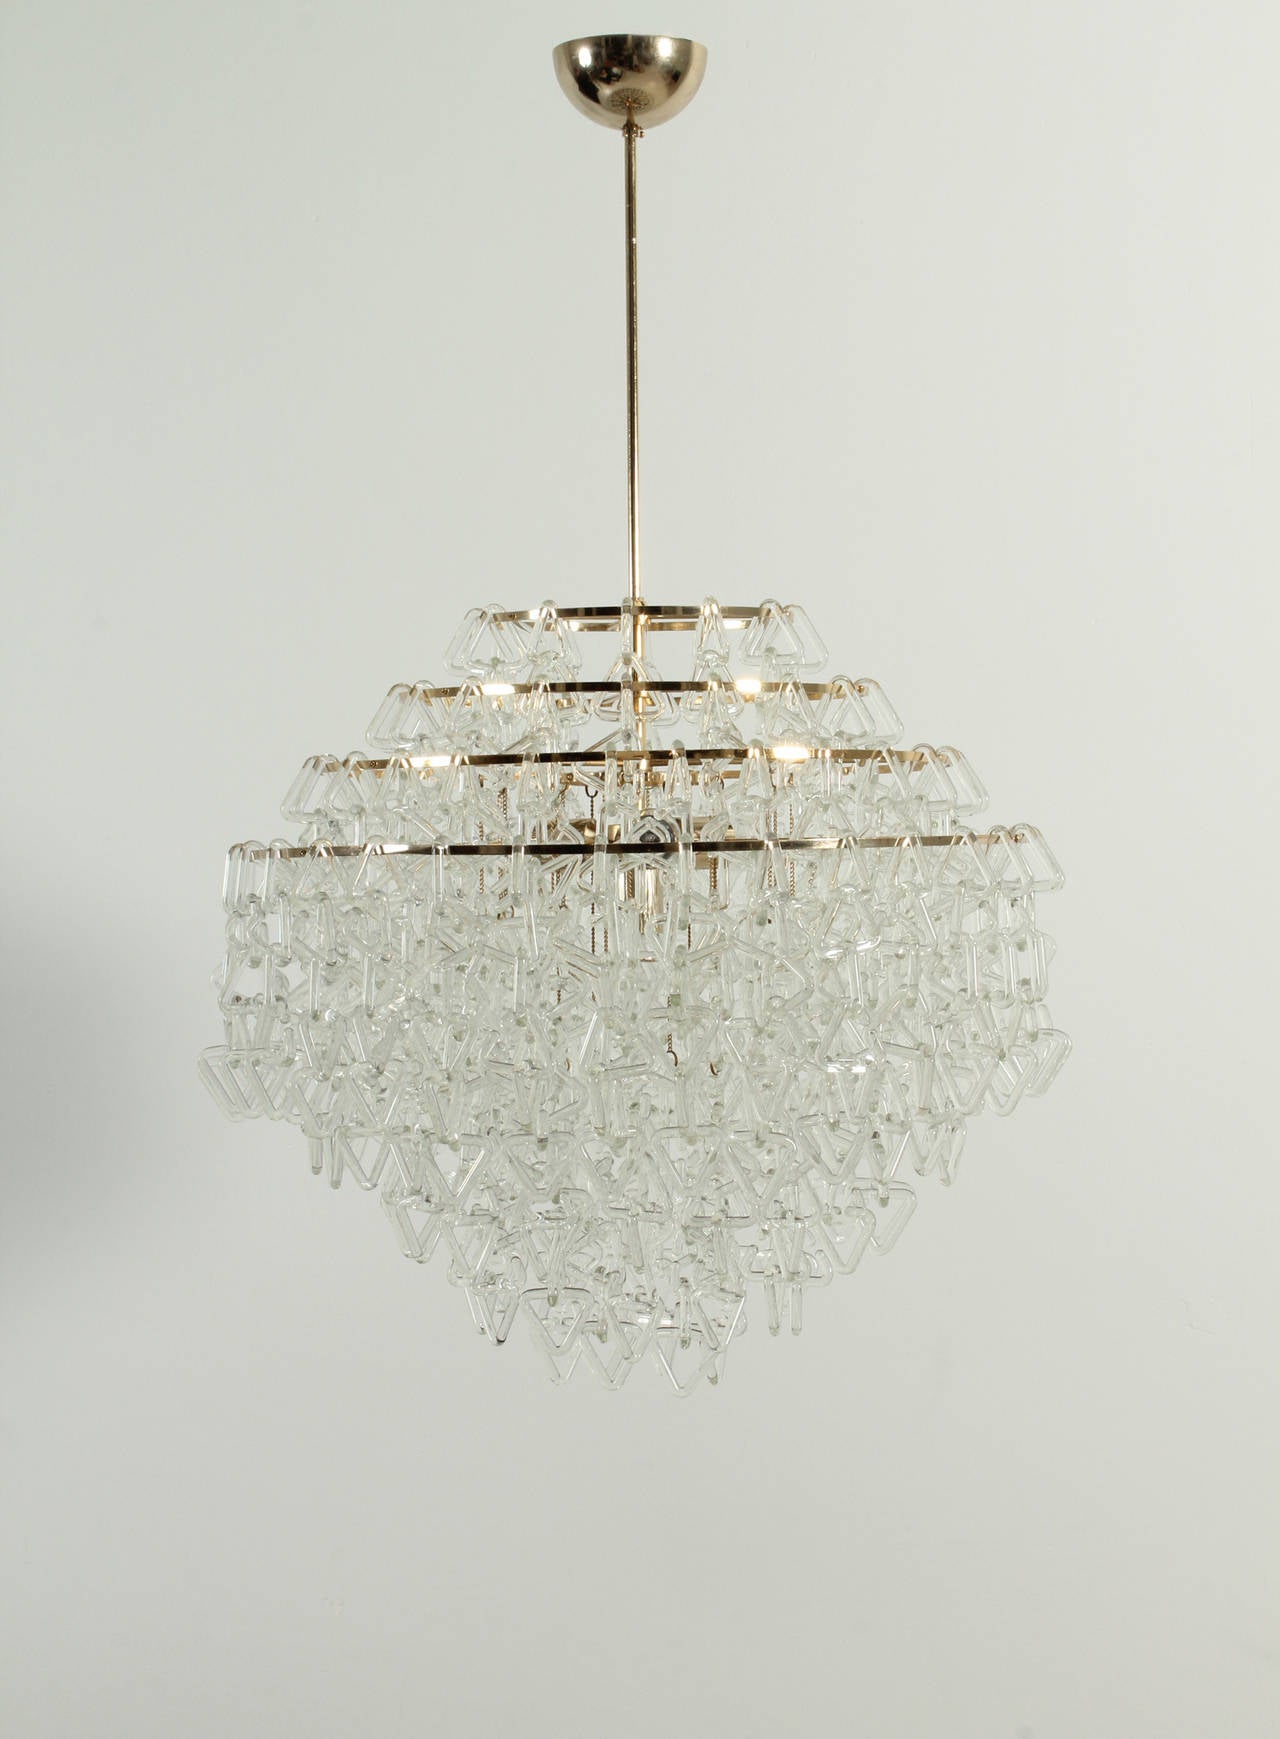 Exceptional Italian chandelier from 1970s, in the manner of Angelo Mangiarotti works. Made of hundreds of Murano glass pieces interlaced with triangular form and brass structure with four lights.